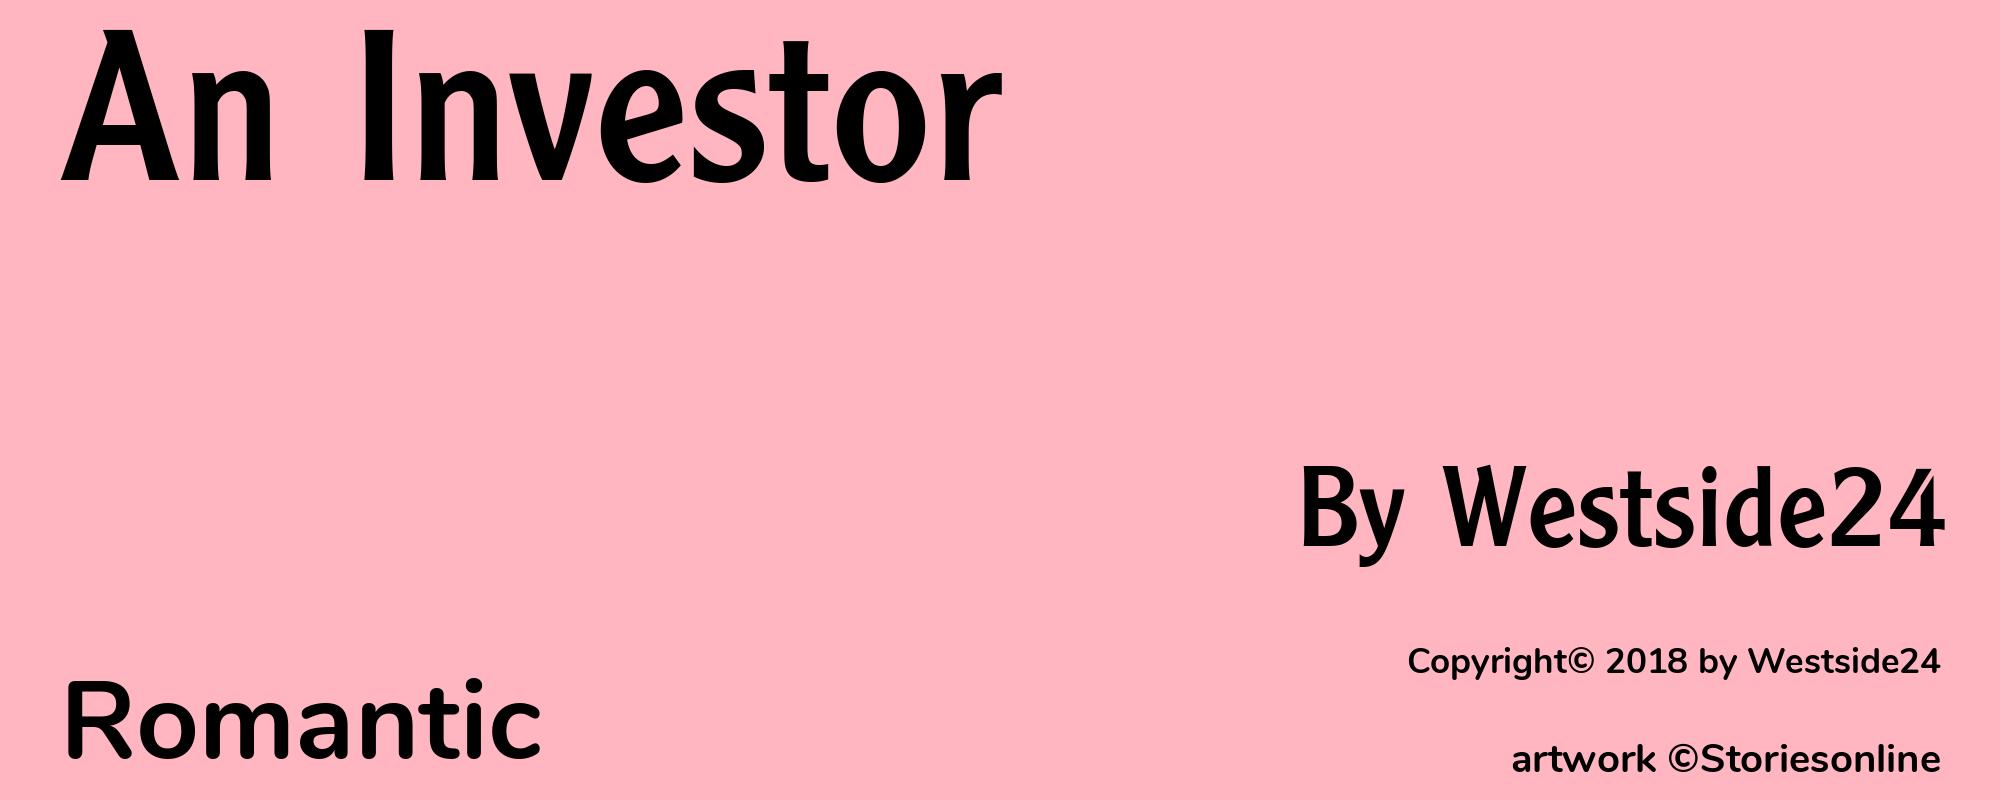 An Investor - Cover